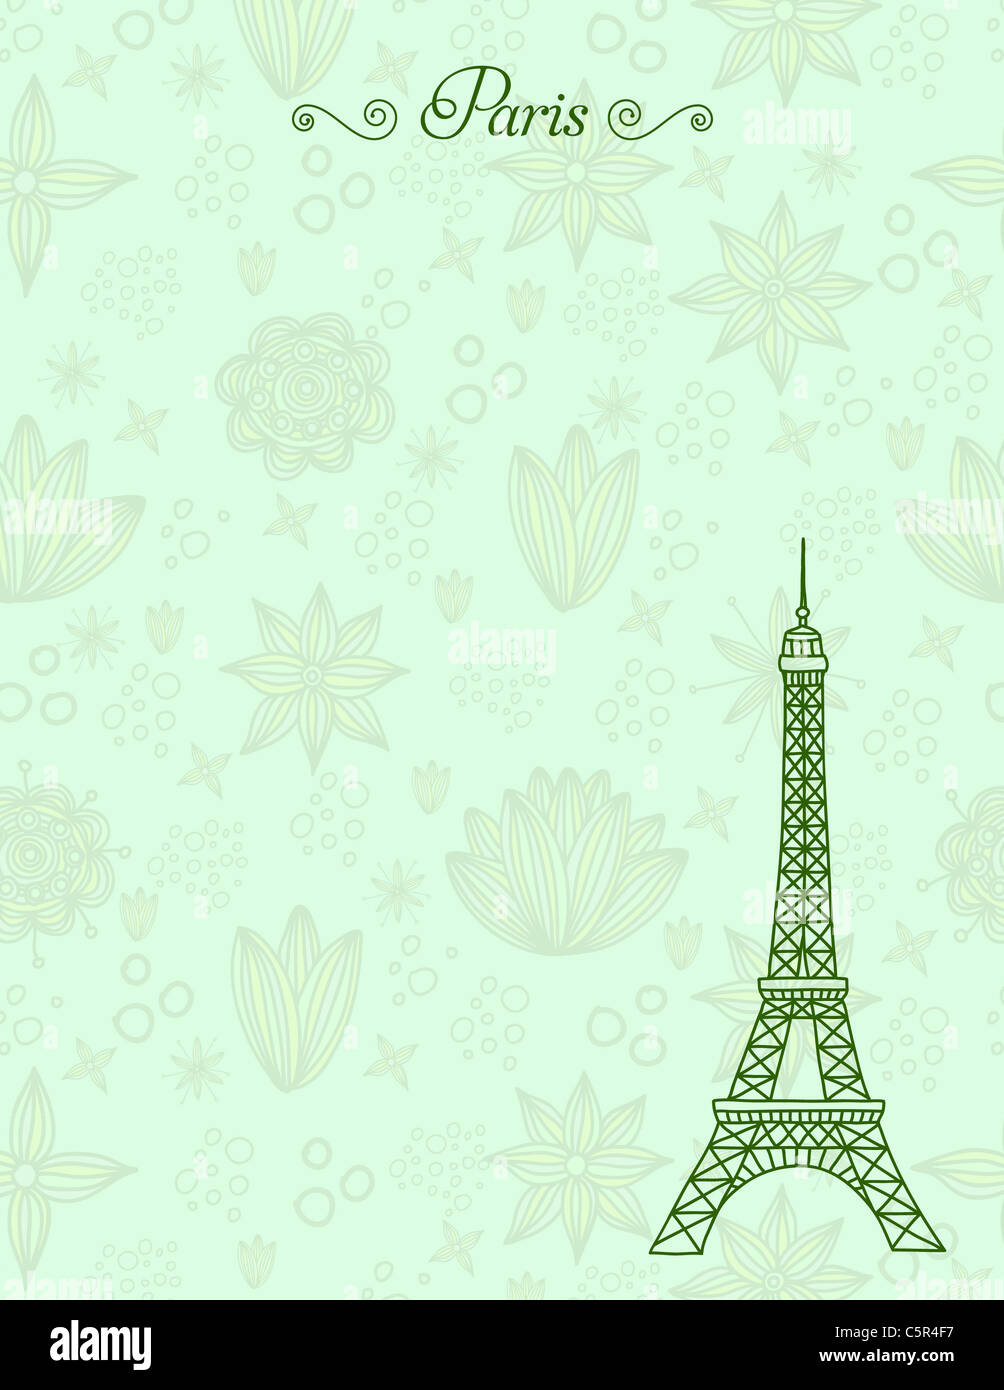 Eiffel Tower illustration - exclusive to Alamy only Stock Photo